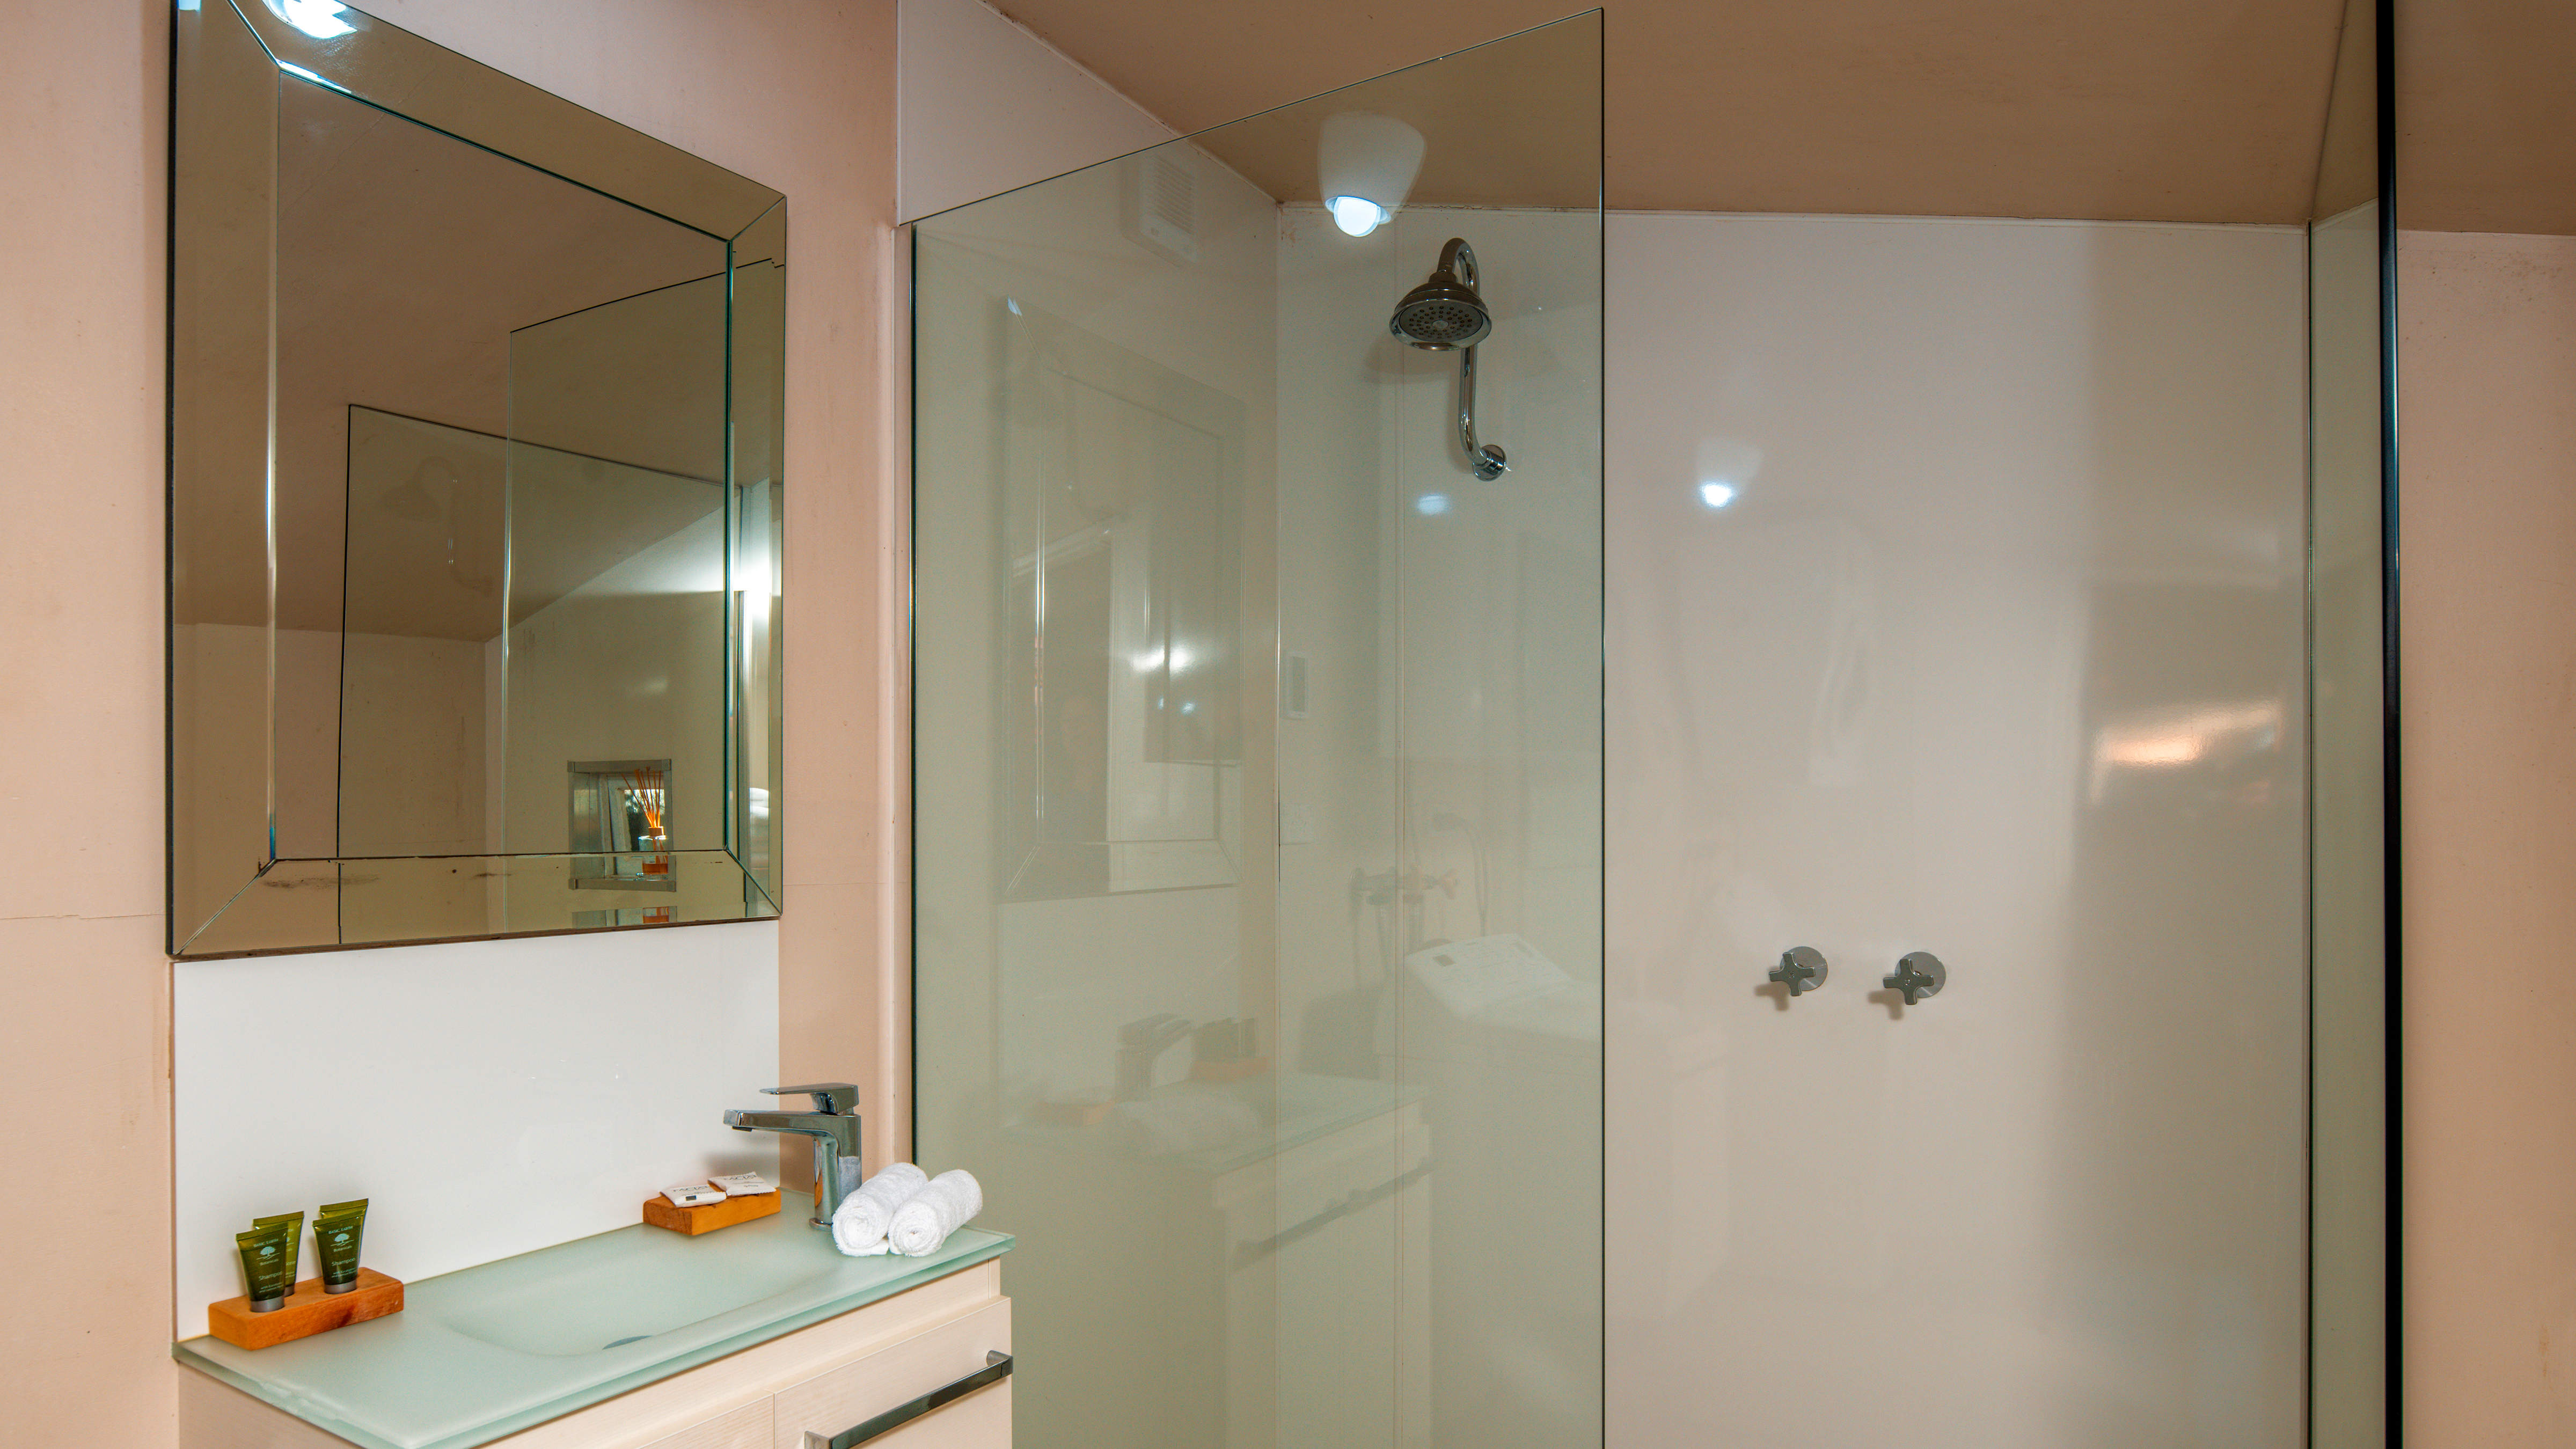 A large square mirror hangs on the wall above the basin. There are shampoo and conditioner bottles, soaps and face cloths on the basin alongside a chrome pillar tap. A clear glass shower screen has a wall mounted shower head and wall taps behind it. Photo: Rob Burnett.